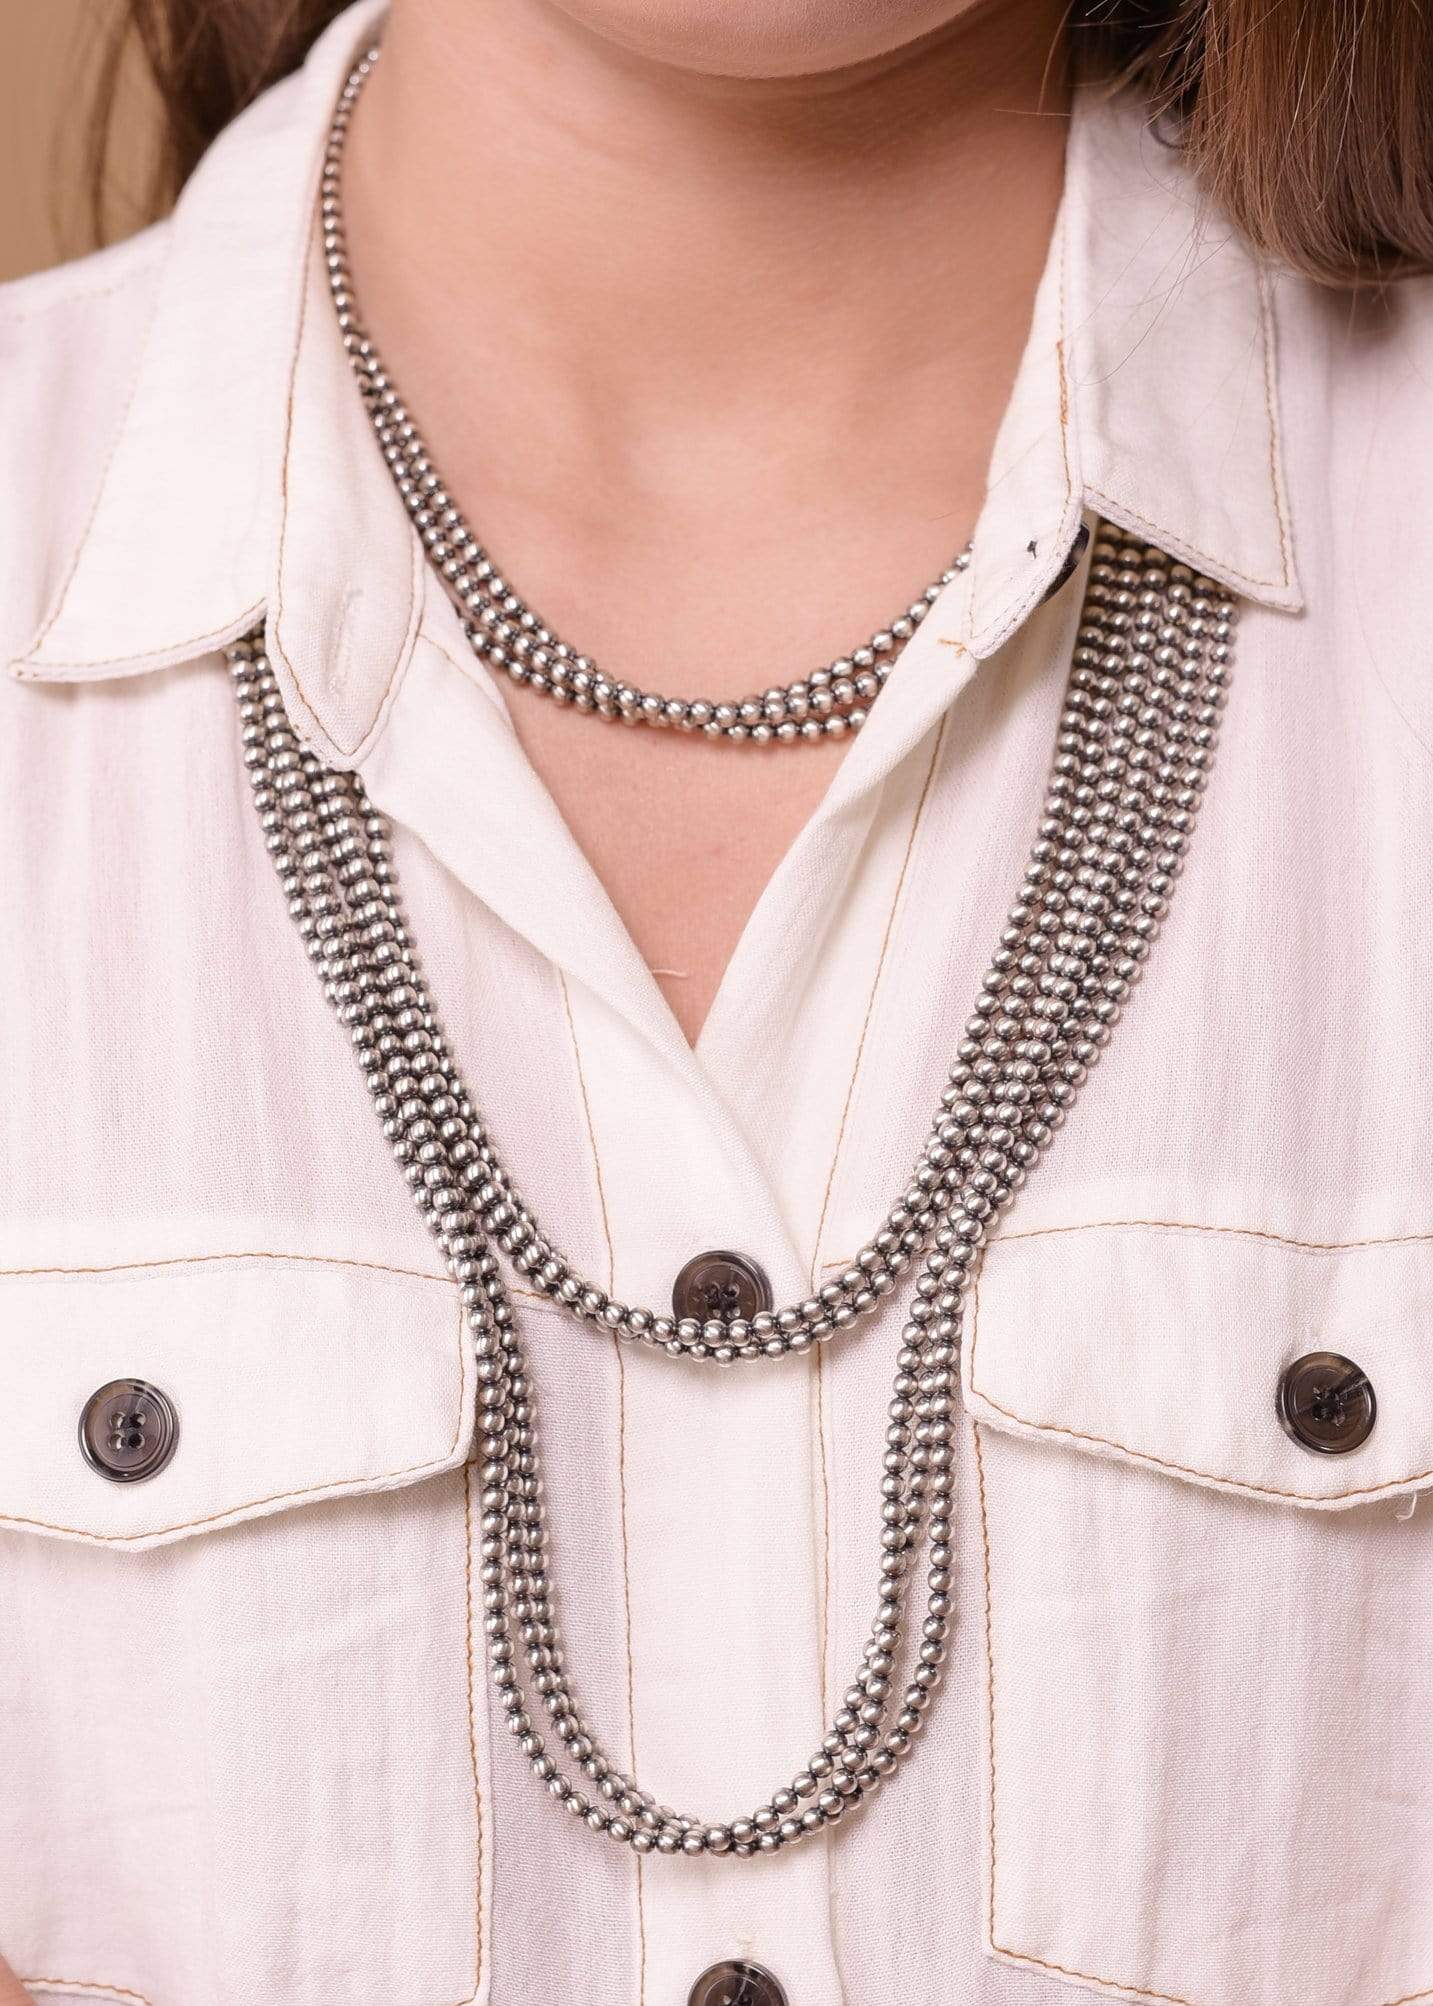 Accessorize In Style Sterling Navajo Pearls 4 mm Navajo Pearl 3 Strand Necklace - 18" - 30"